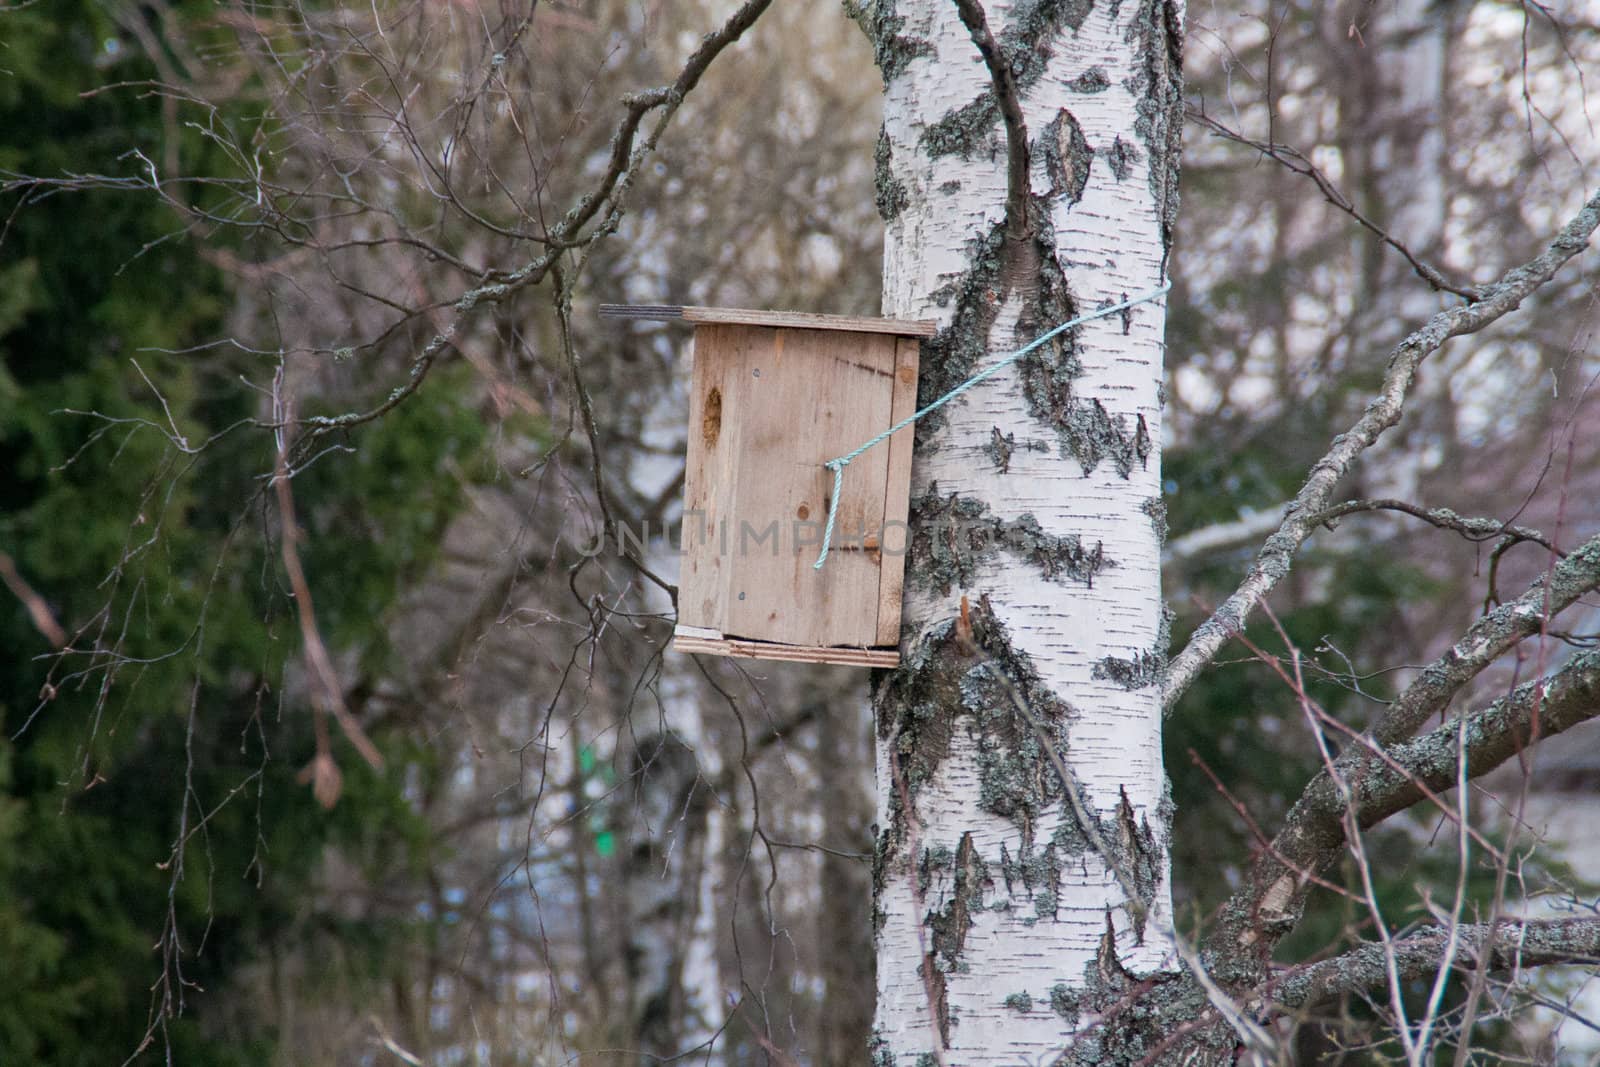 Birdhouse in Finland on a tree. Spring time.